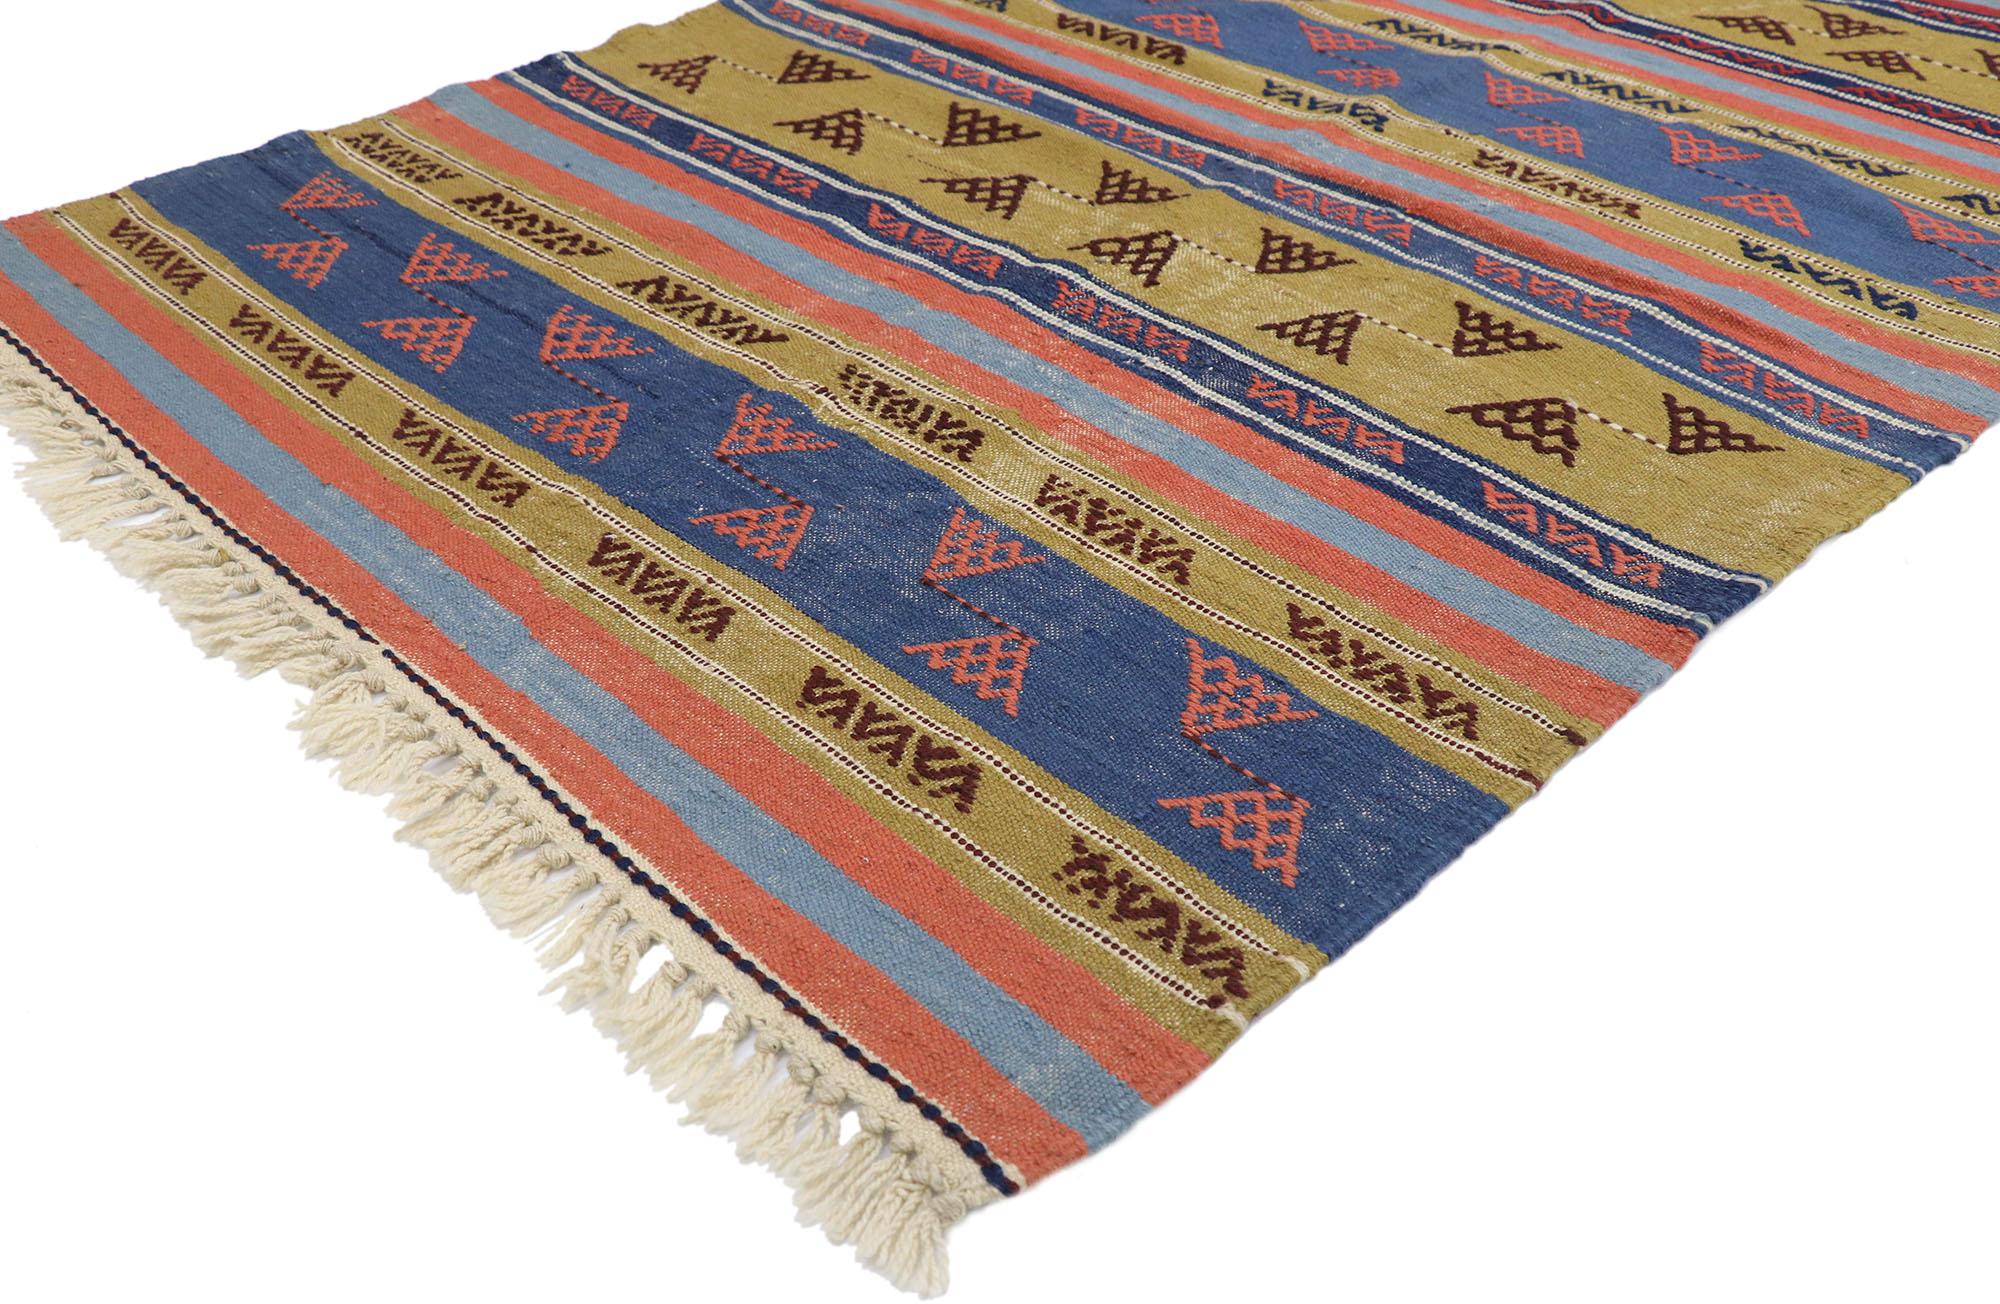 77813, distressed vintage Persian Shiraz Kilim rug with Rustic Tribal style 04'03 x 06'02. Full of tiny details and a bold expressive design combined with vibrant colors and tribal style, this hand-woven wool distressed vintage Persian Shiraz Kilim